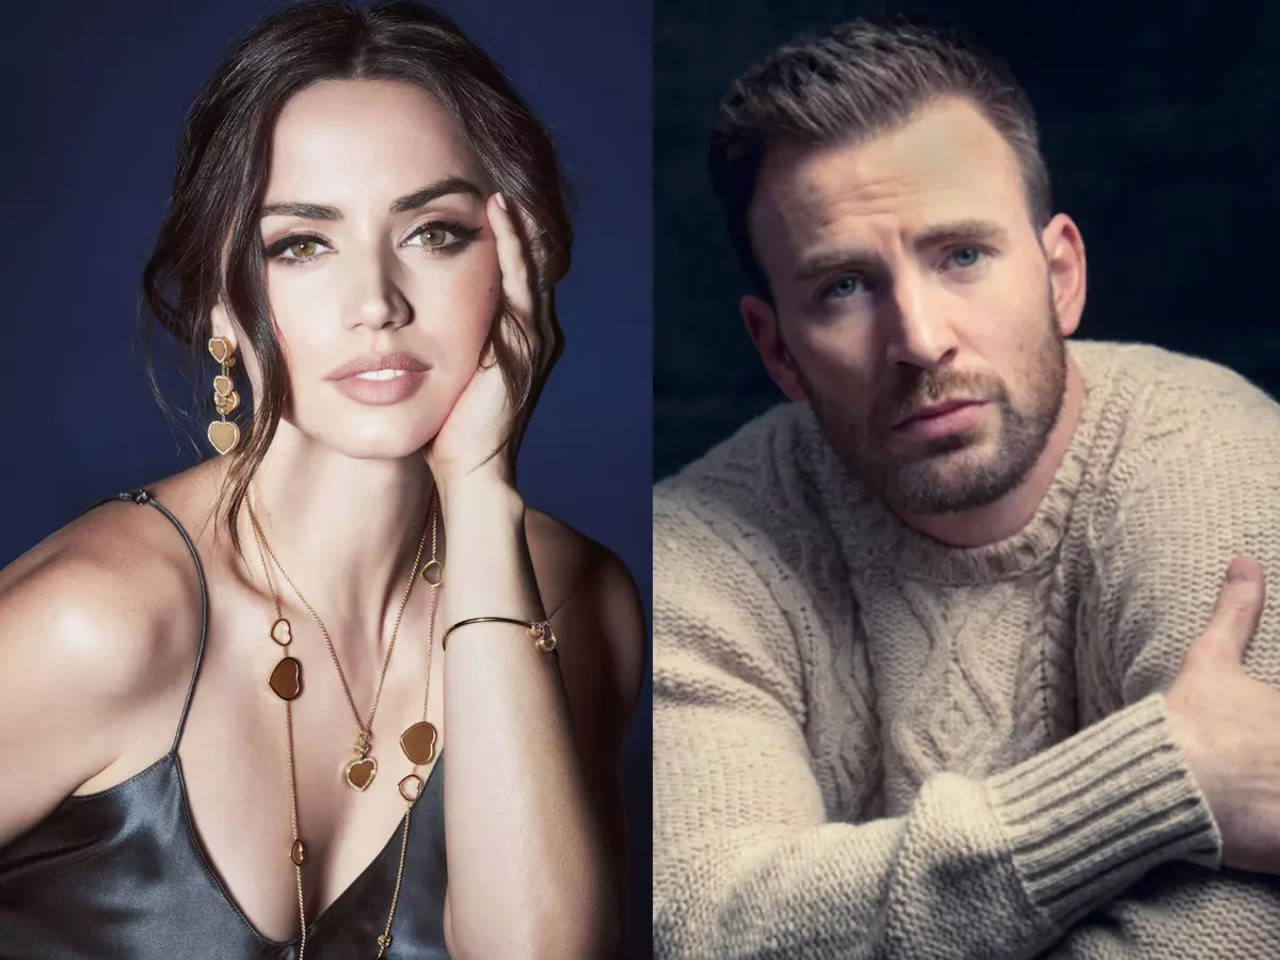 Why Chris Evans' and Ana de Armas' new film should remain ghosted